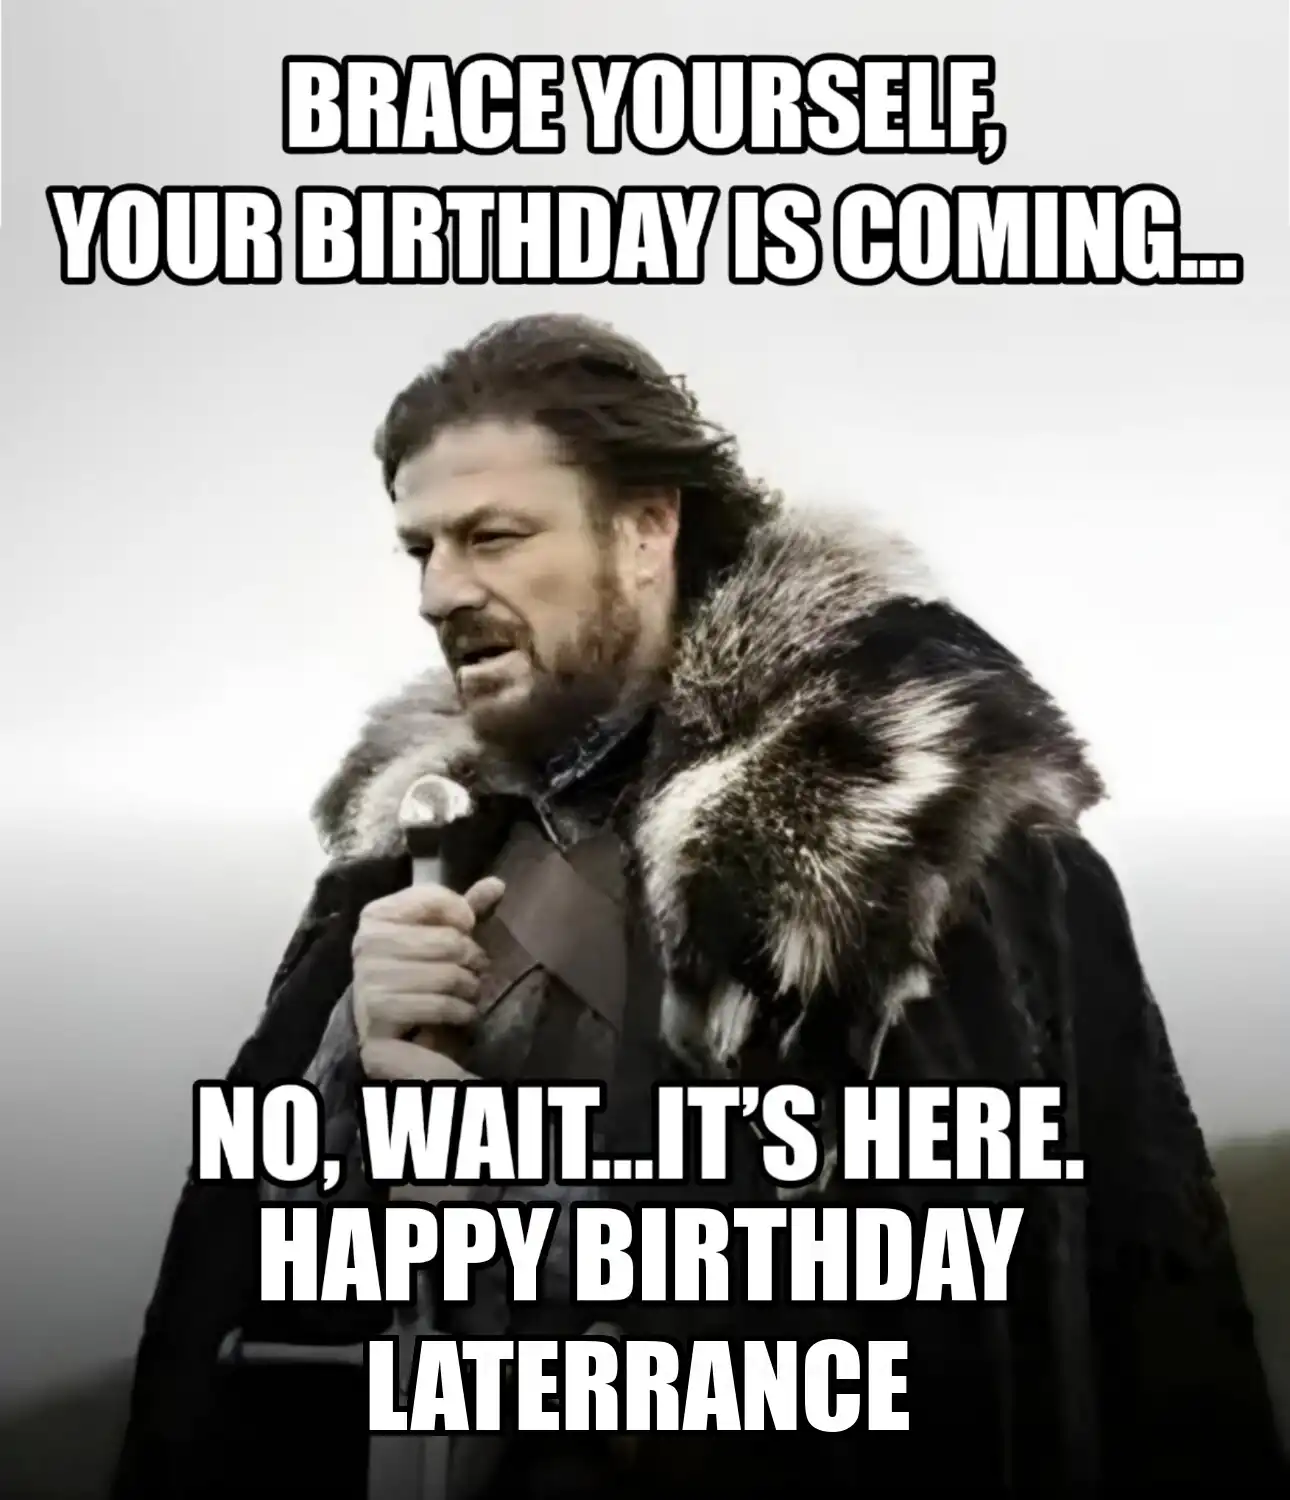 Happy Birthday Laterrance Brace Yourself Your Birthday Is Coming Meme